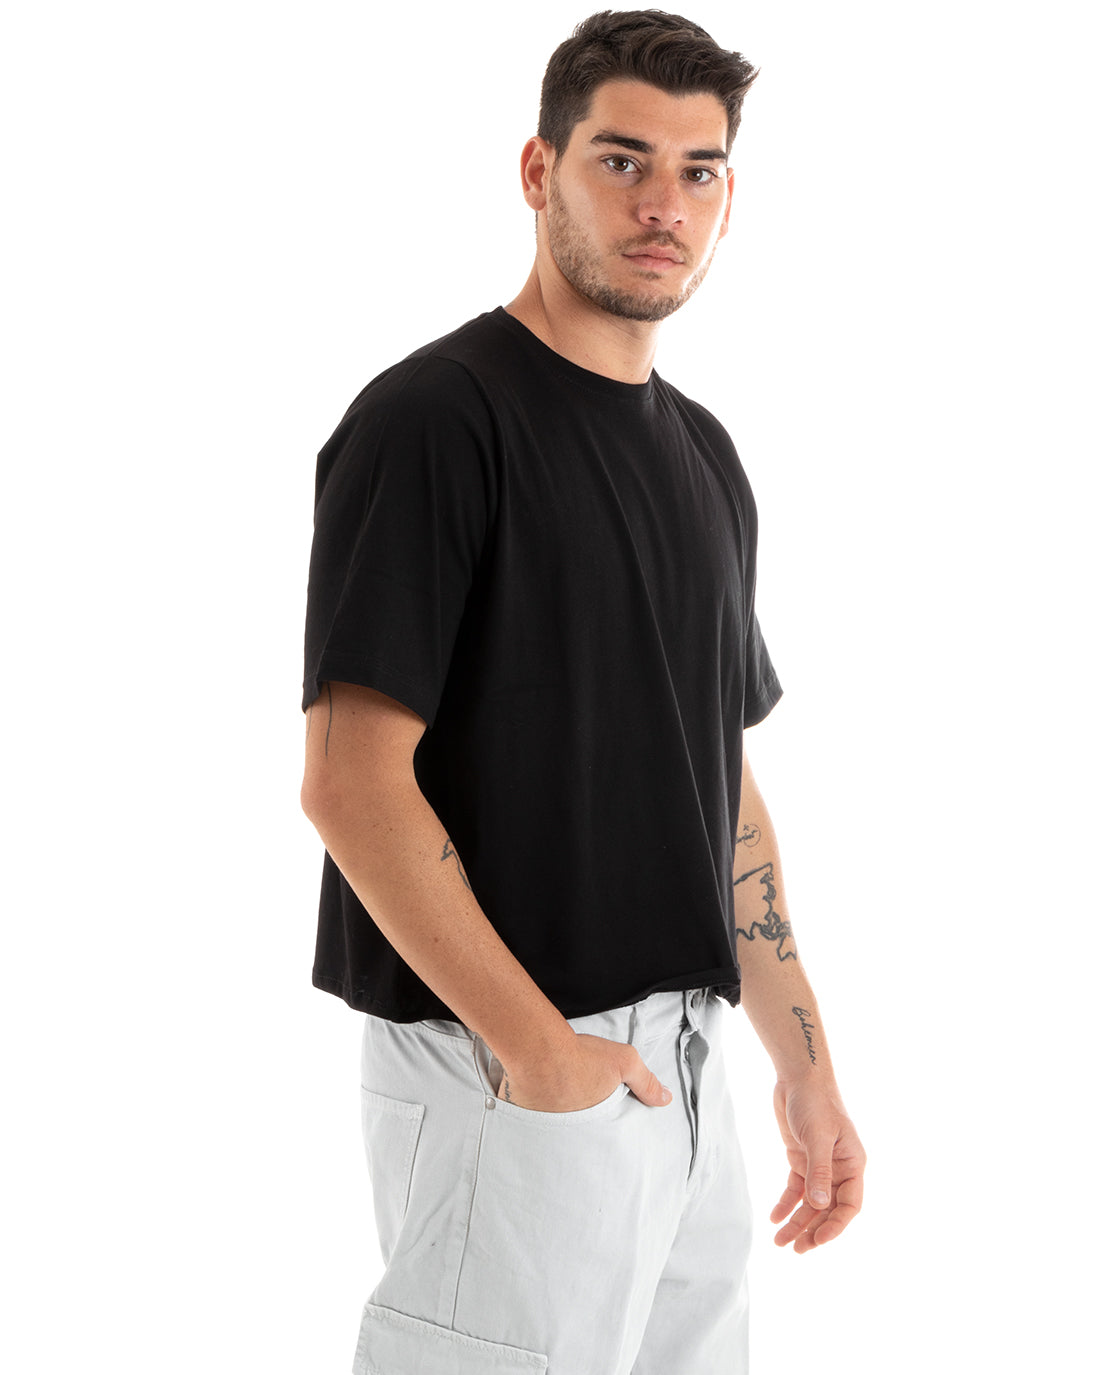 Men's T-shirt Cropped Oversize Boxy Fit Solid Color Short Black Casual GIOSAL-TS2879A